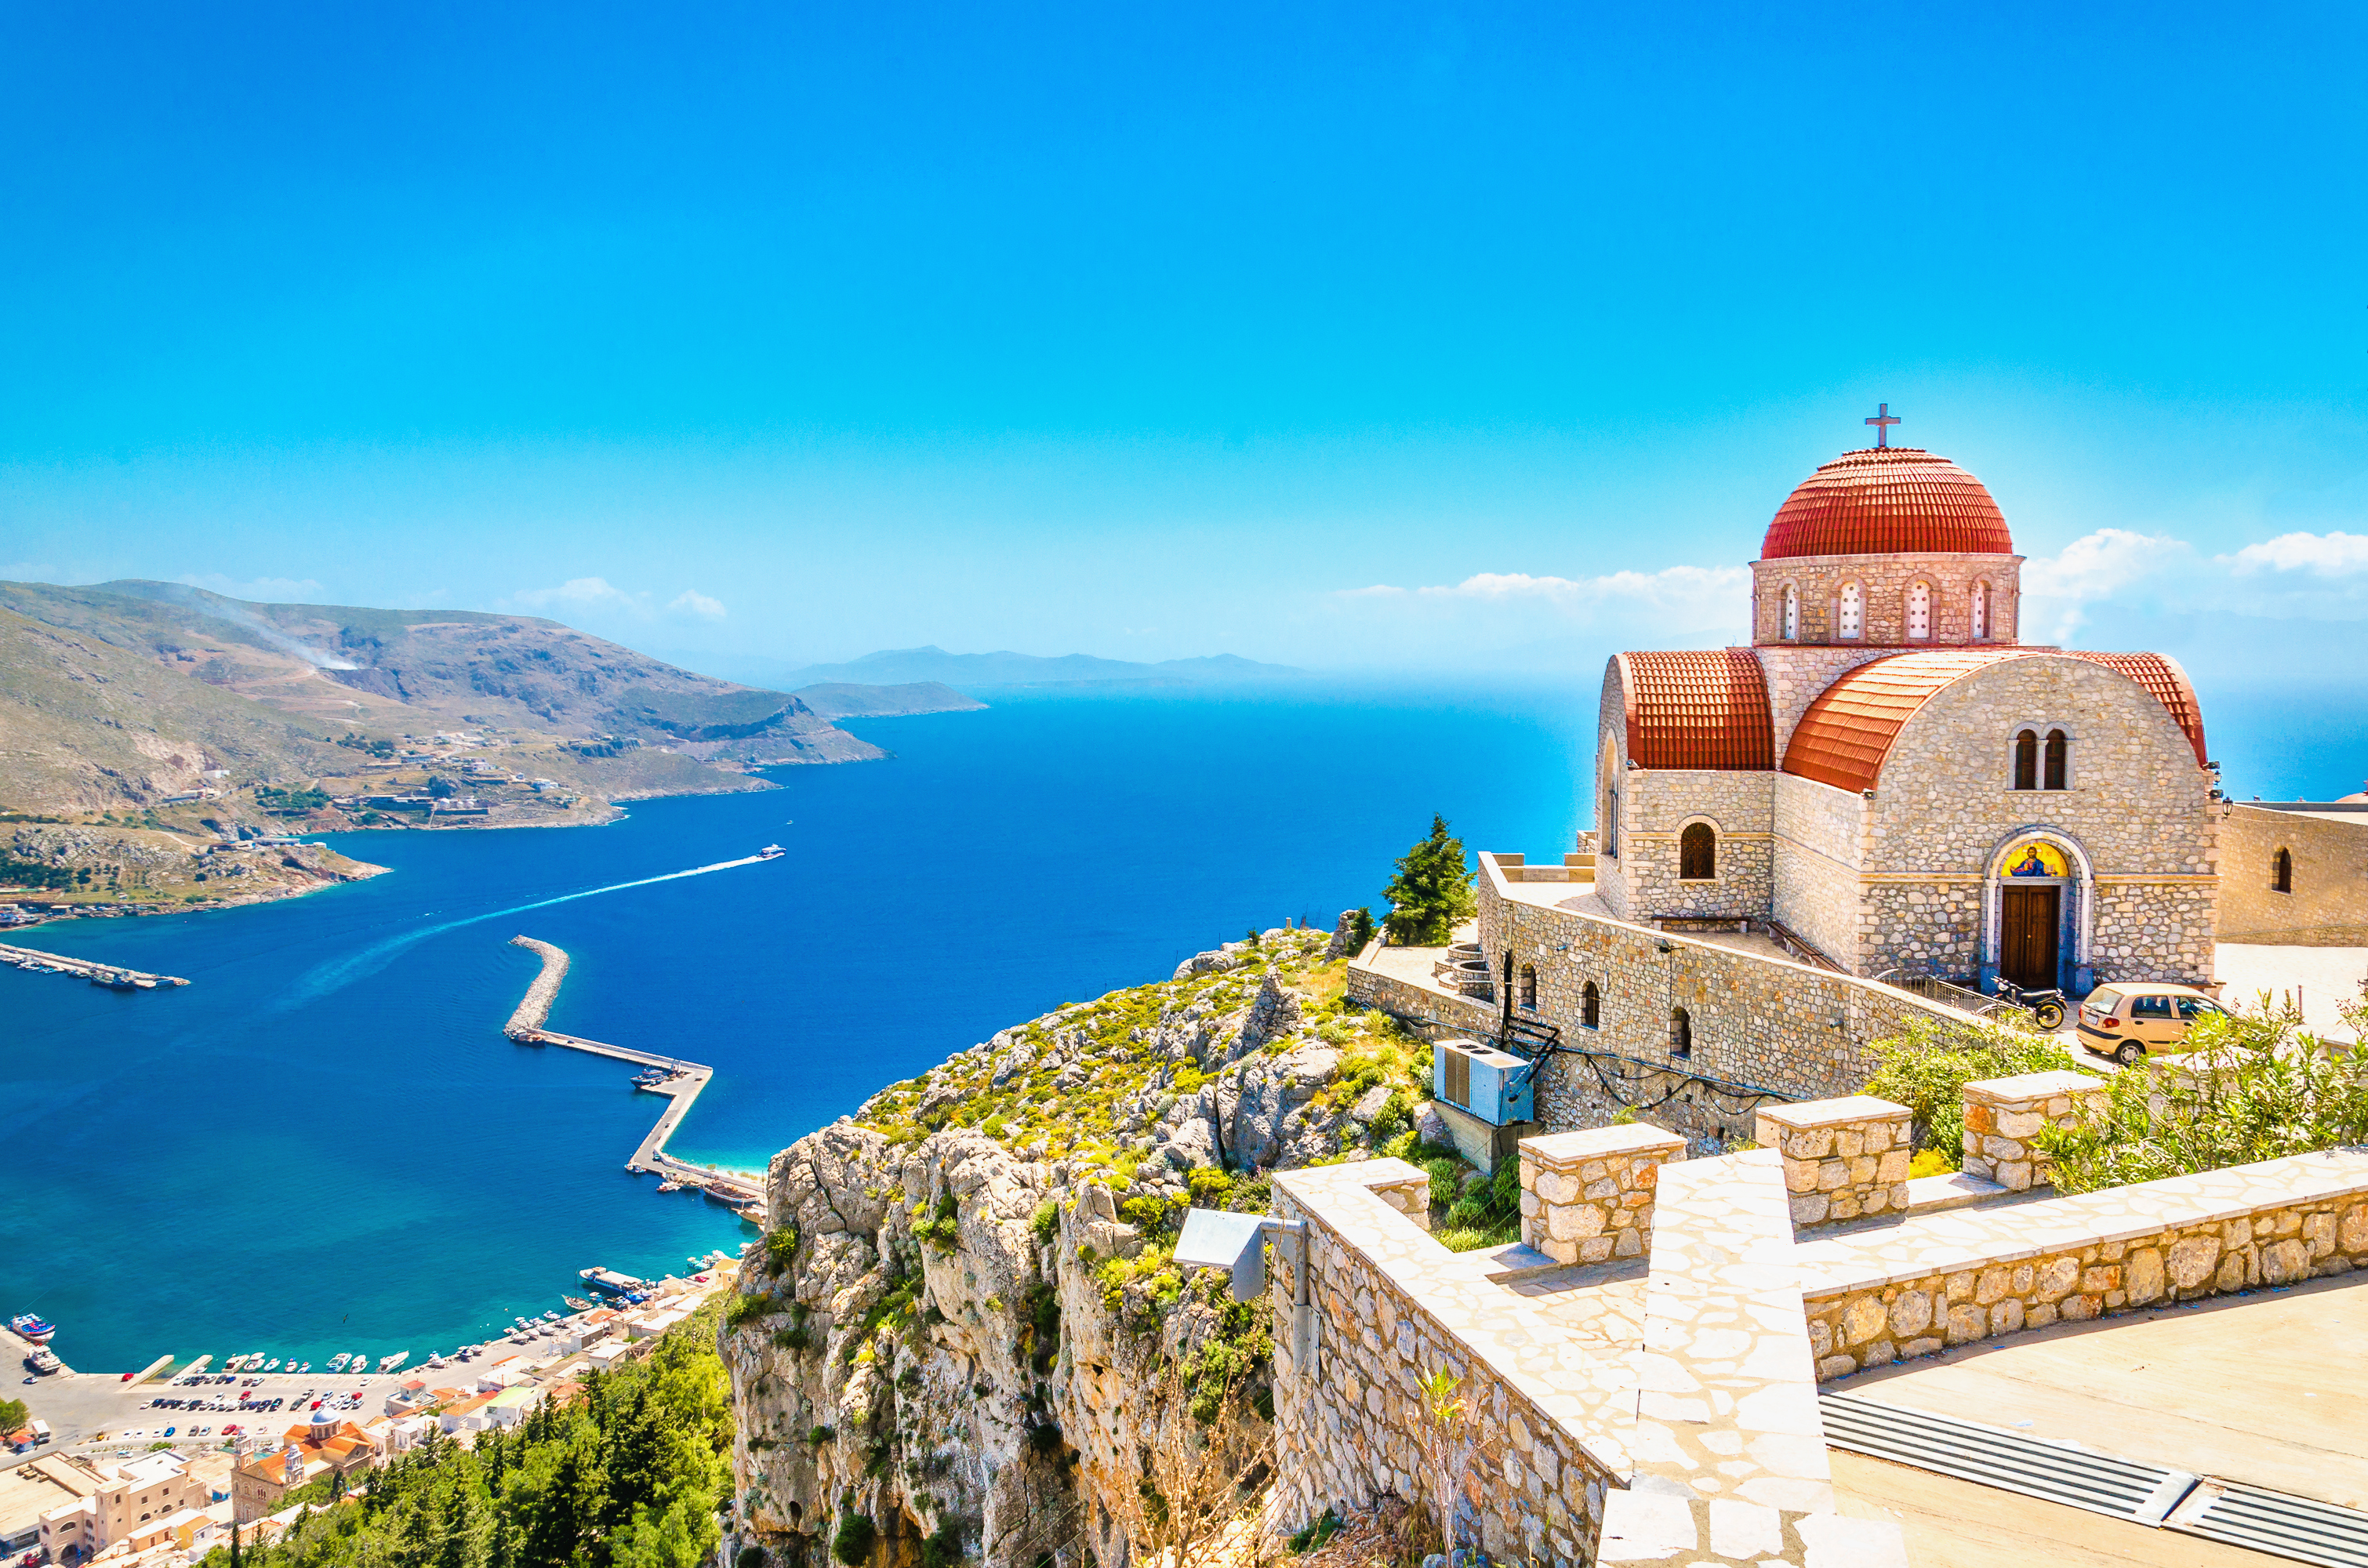 Lesser-known Greek islands, Klymnos, Thassos and Lefkada, have taken the top spots in a check on the cheapest package holiday destinations in Europe